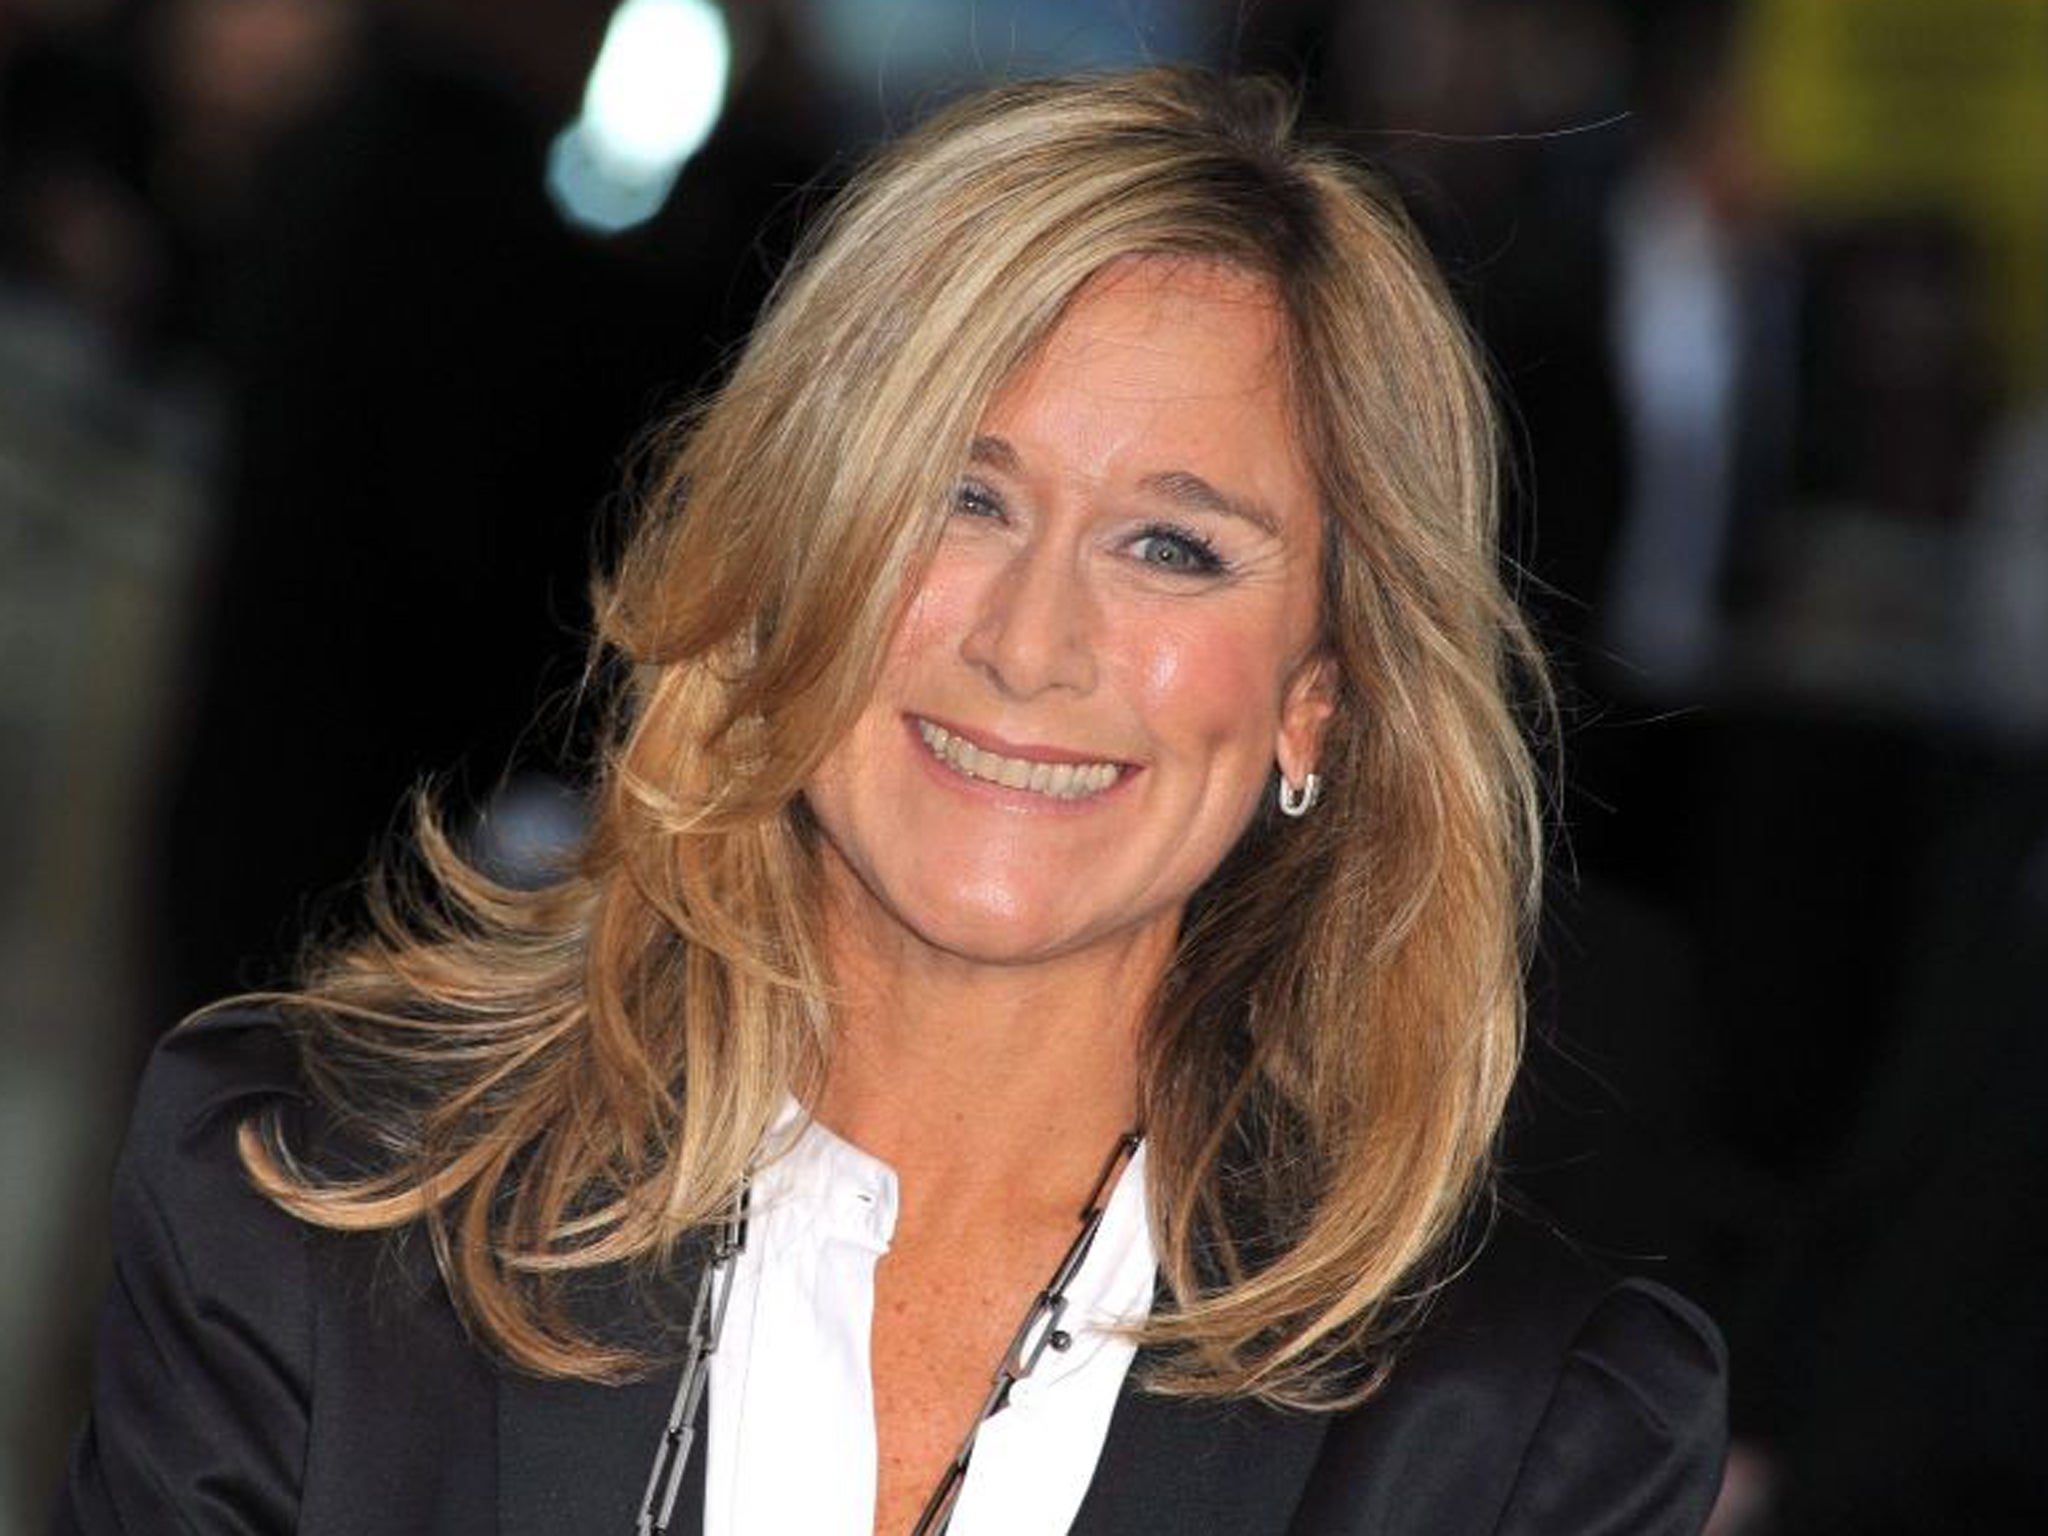 Angela Ahrendts spent more than seven years with Burberry, transforming it into a global luxury brand with a growing presence in emerging markets